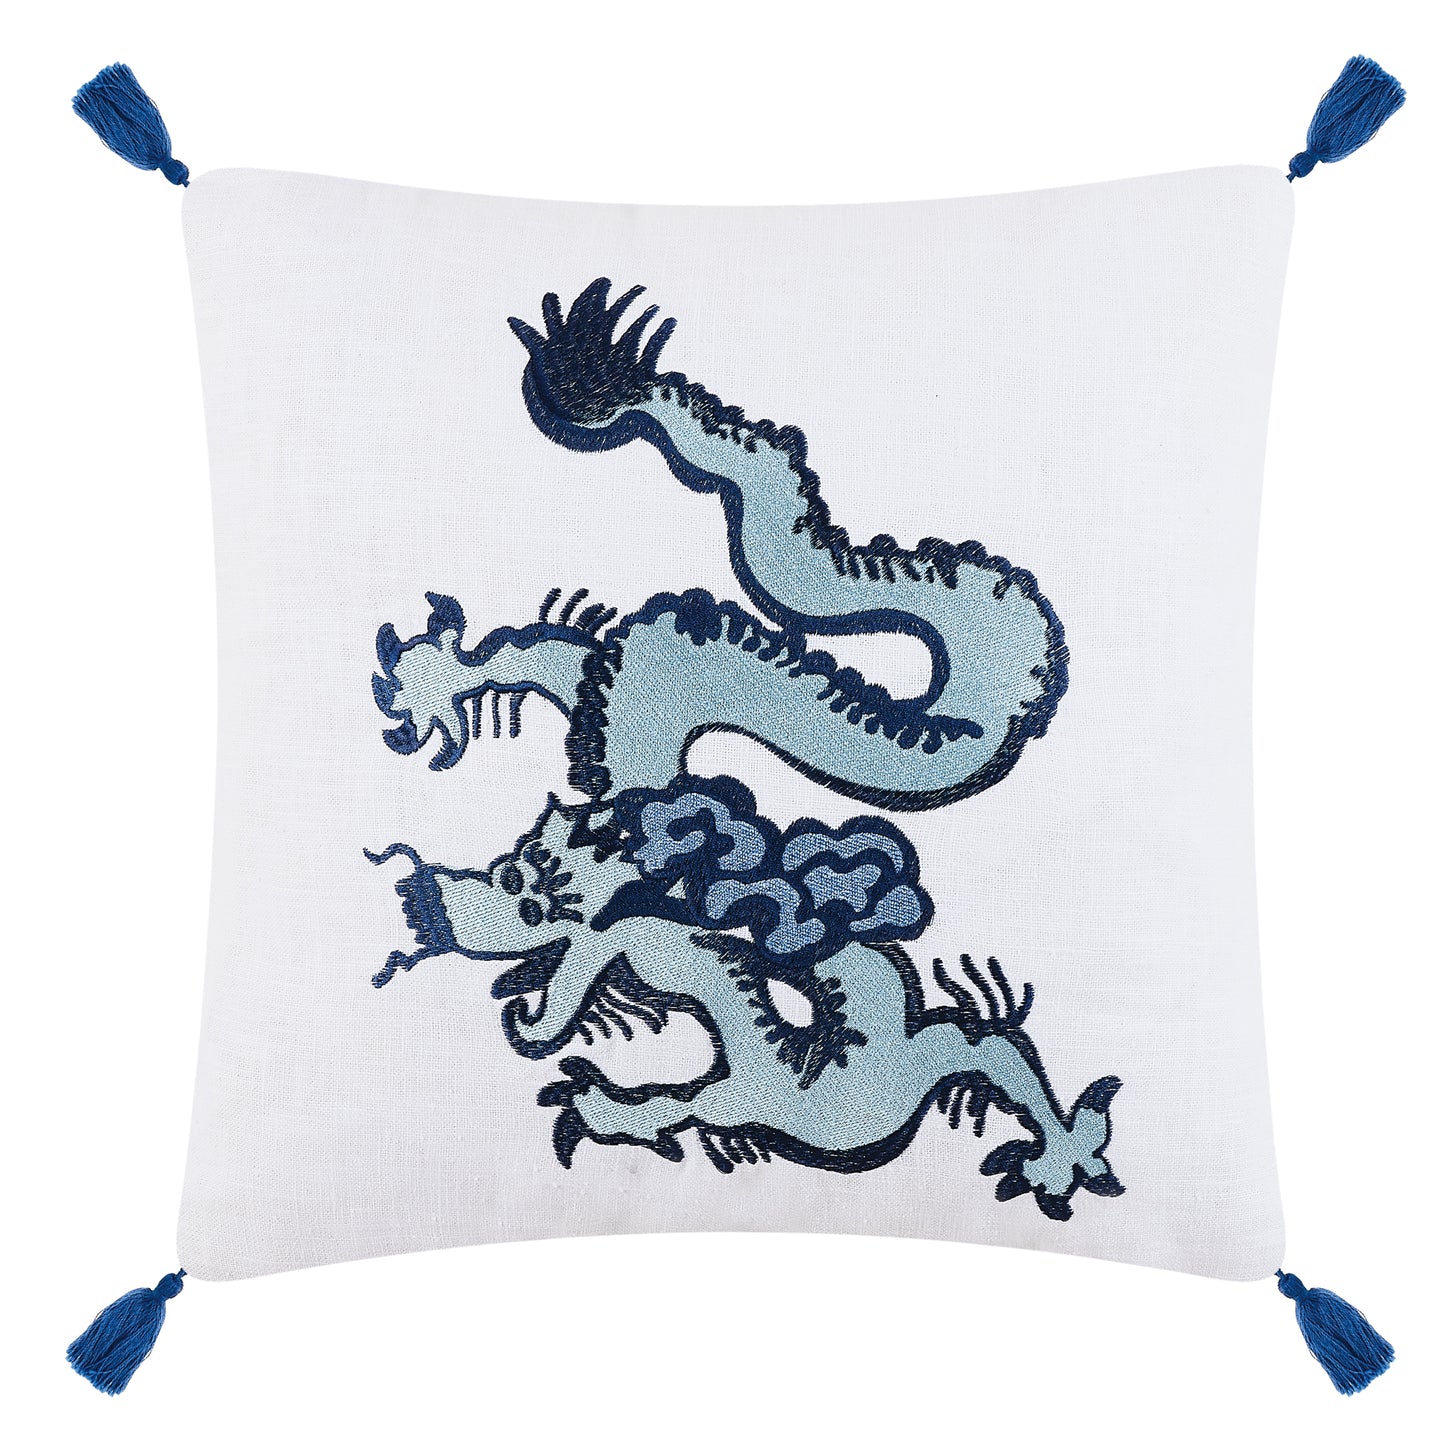 Enter the Dragon Embroidered Pillow